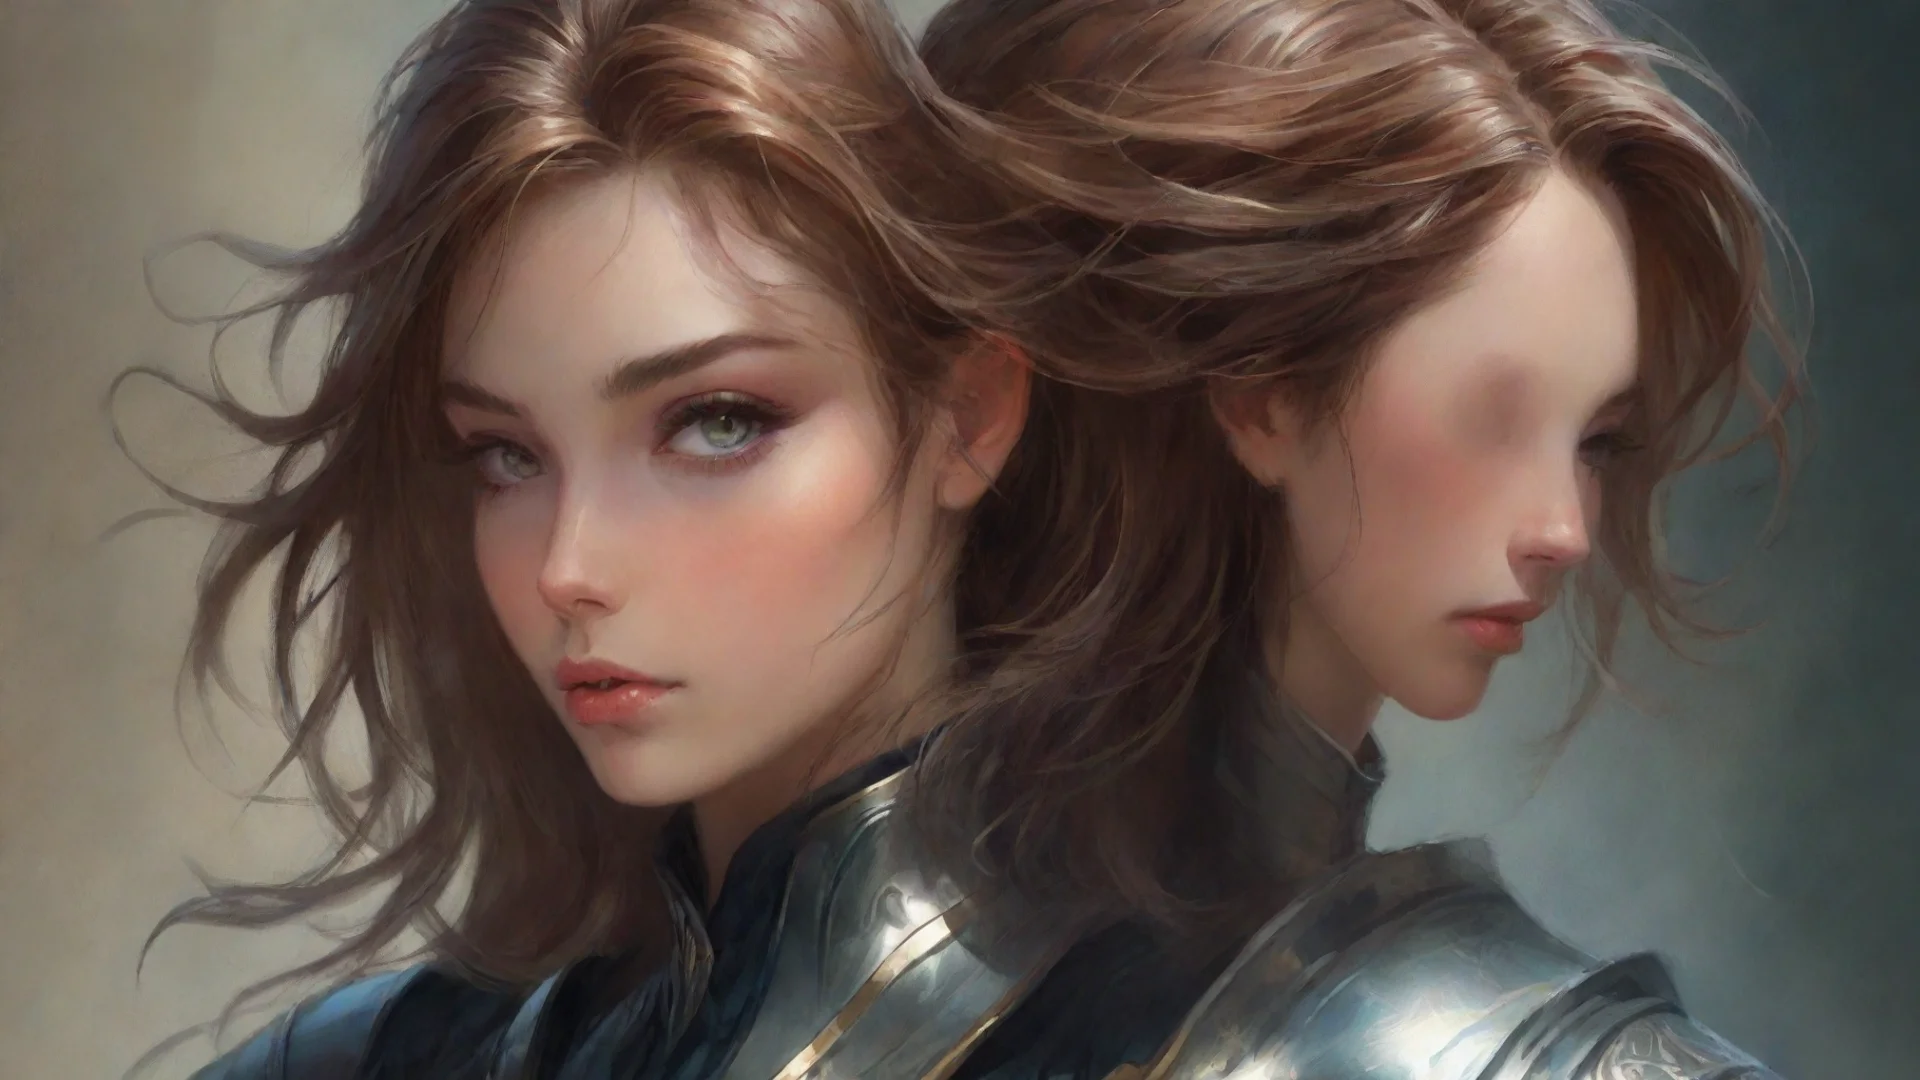 trending stunning portrait illustration beautiful androgynous wizard knight by ross tran by charlie bowater illustration highly d good looking fantastic 1 wide